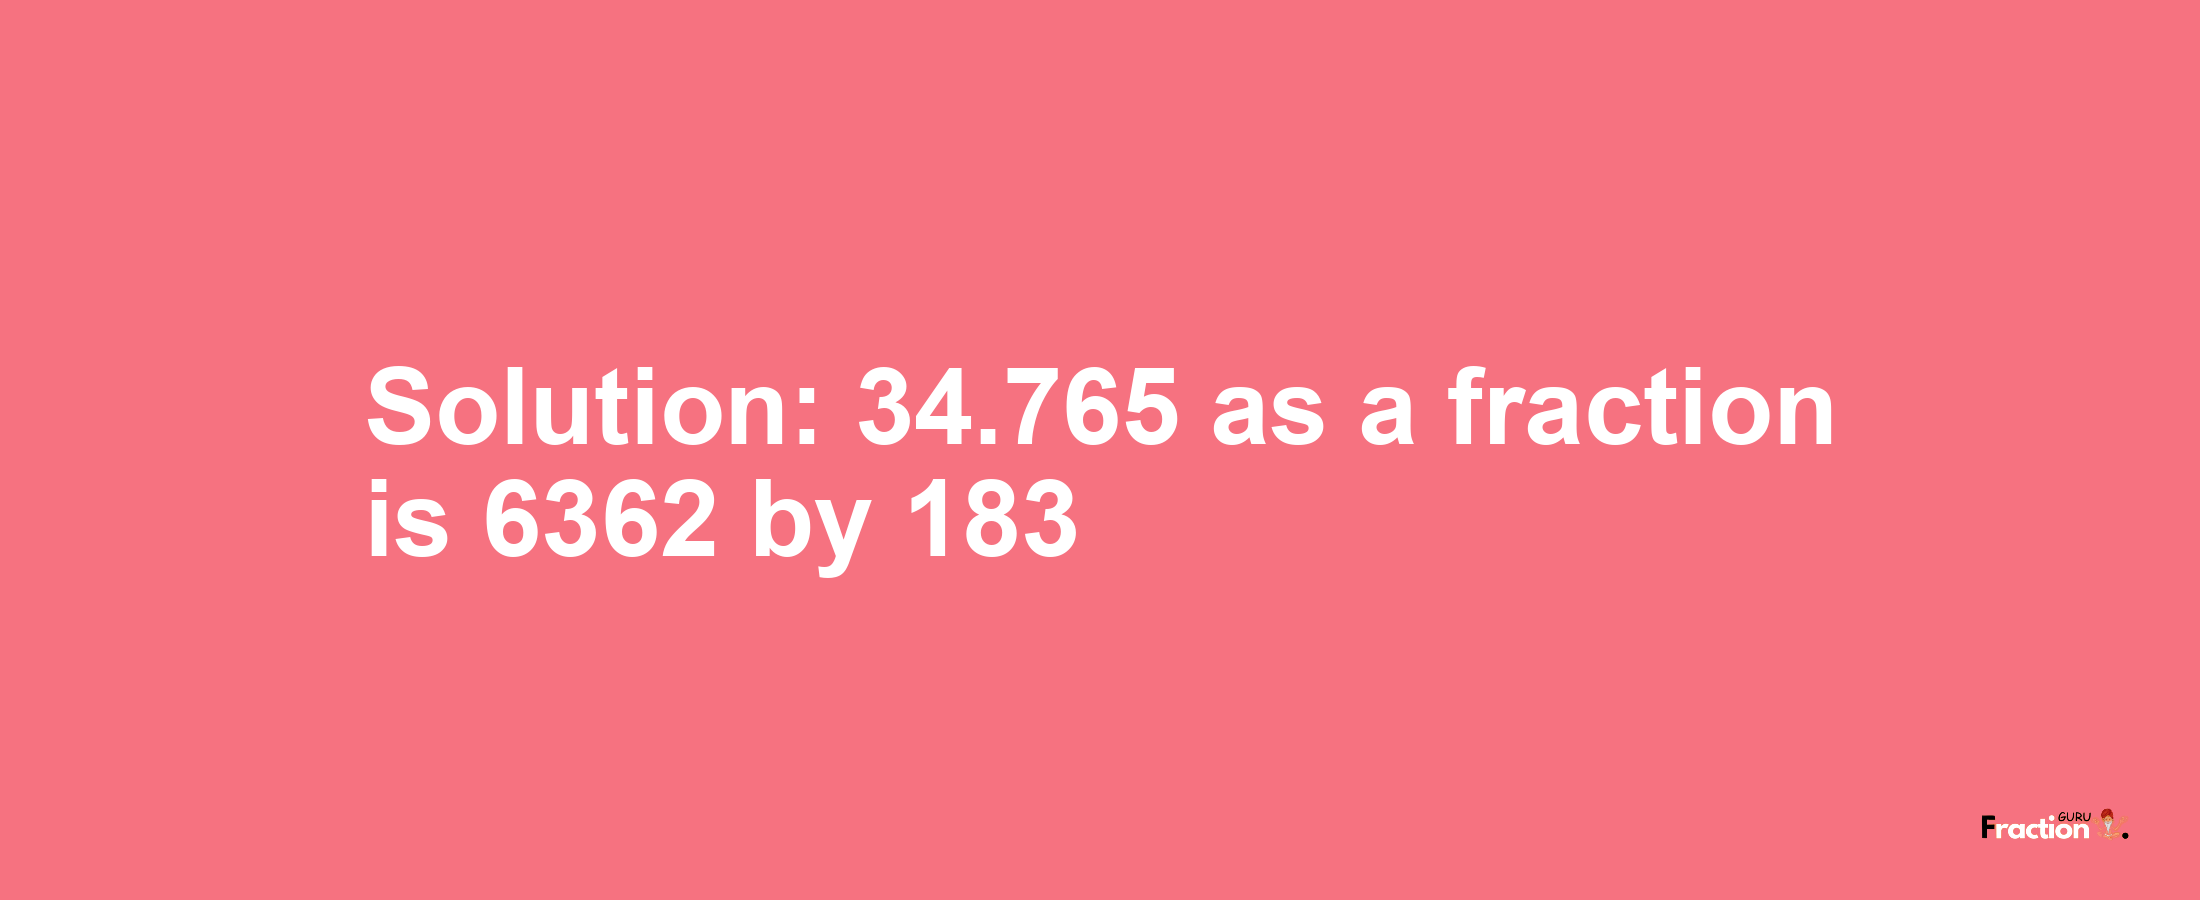 Solution:34.765 as a fraction is 6362/183